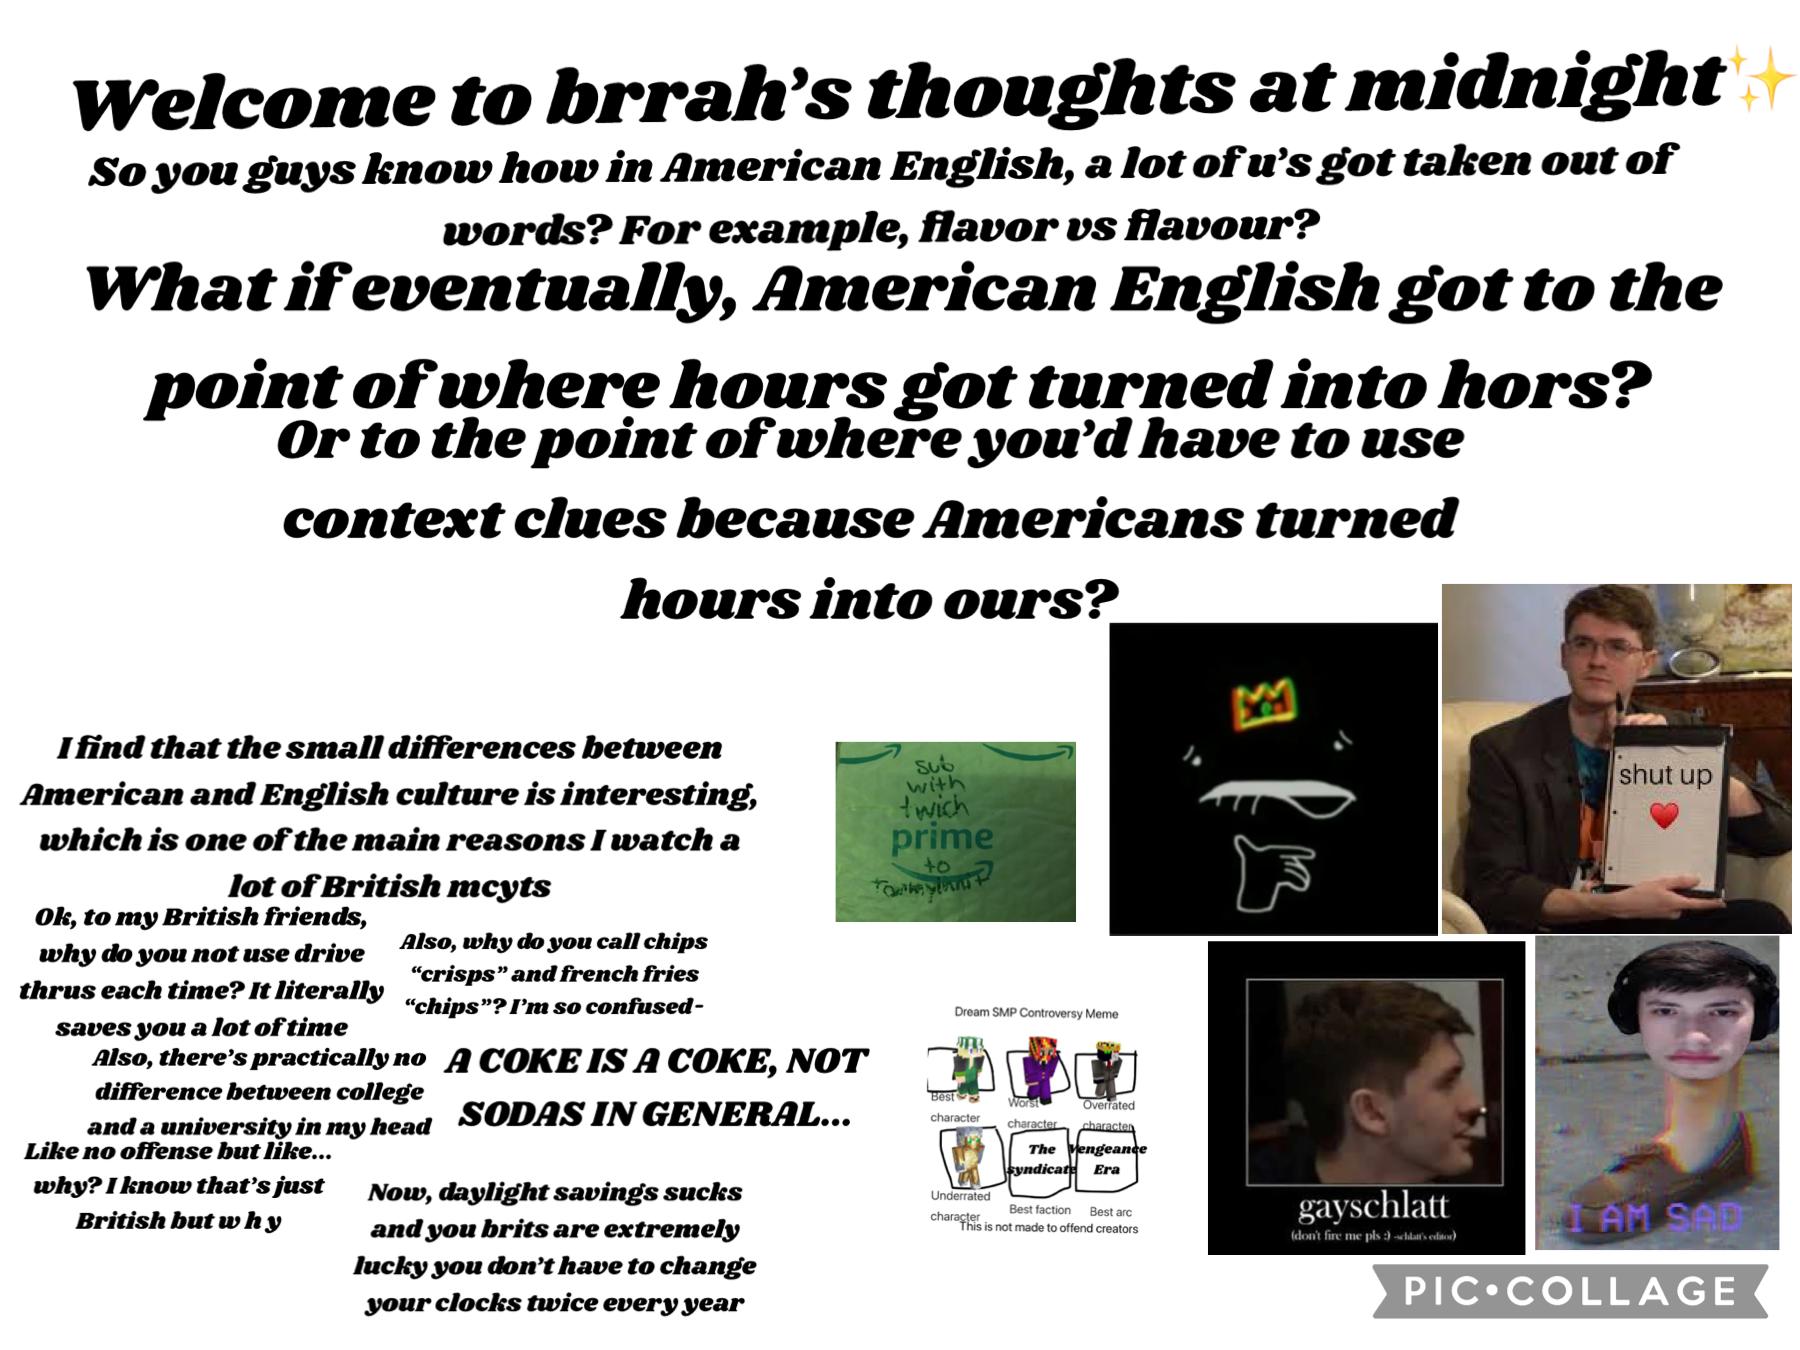 Welcome to BrrahBrrah thinks about the difference in culture between the UK and the US